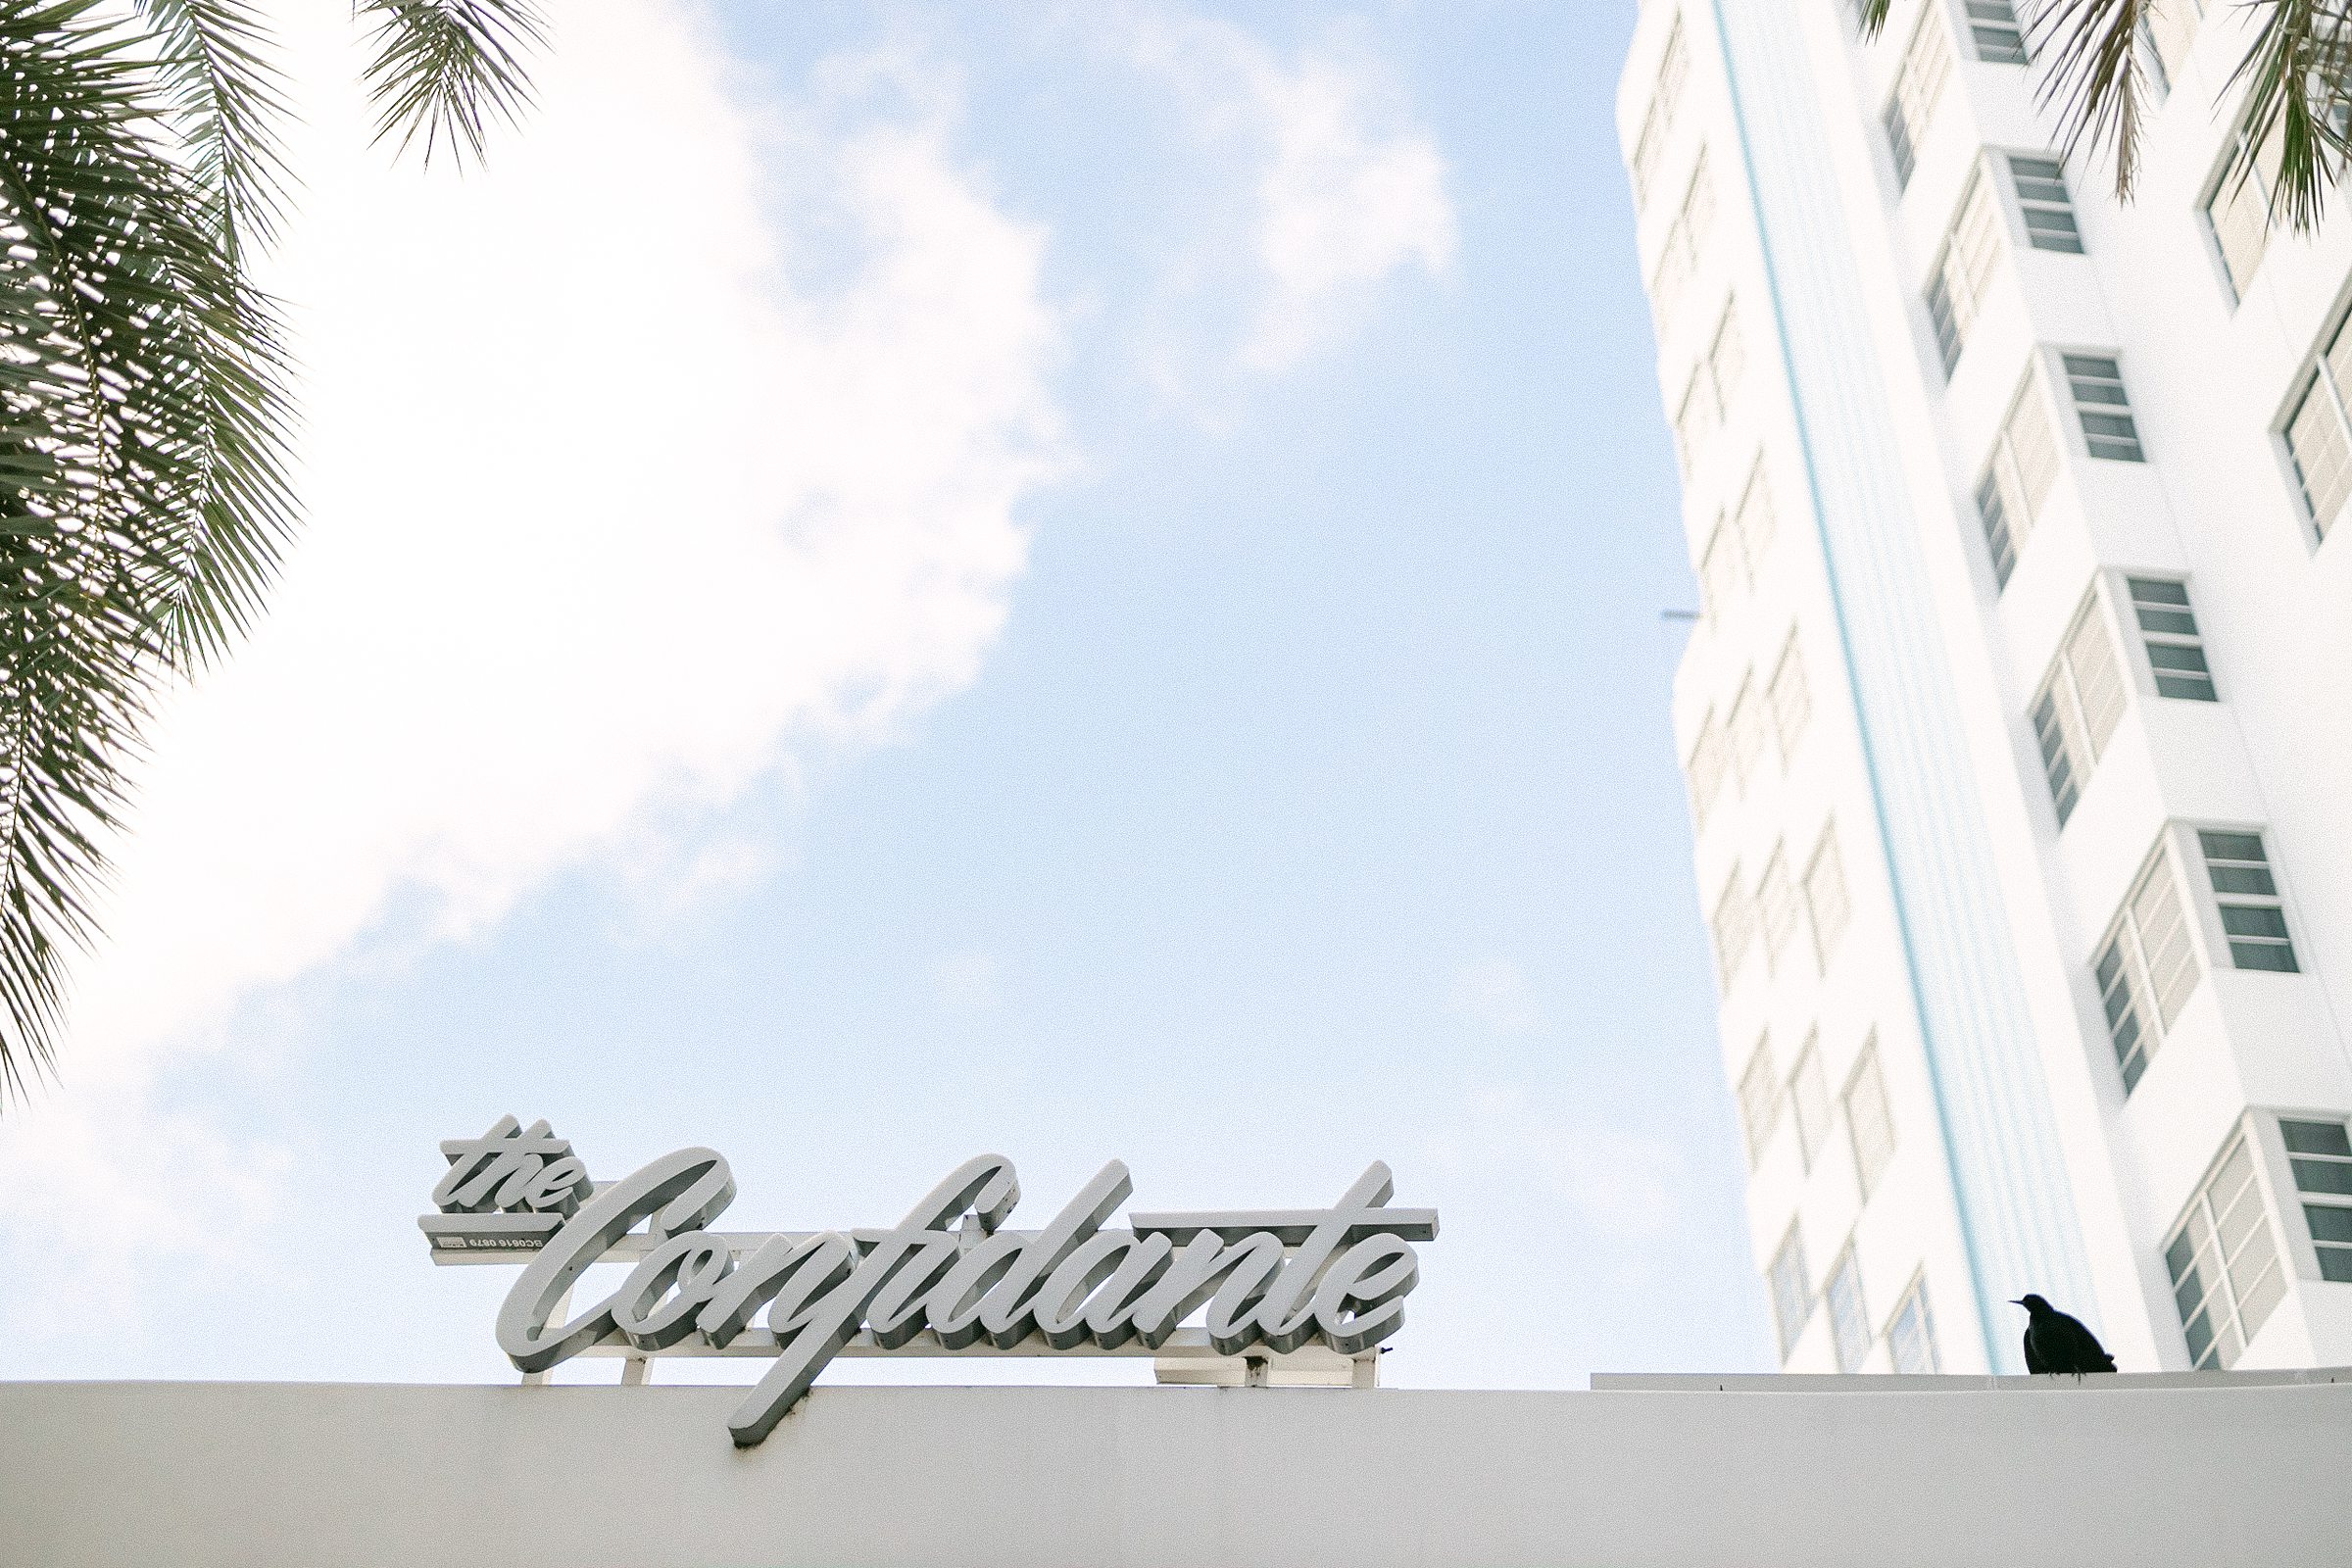 The front of the Confidante Hotel sign